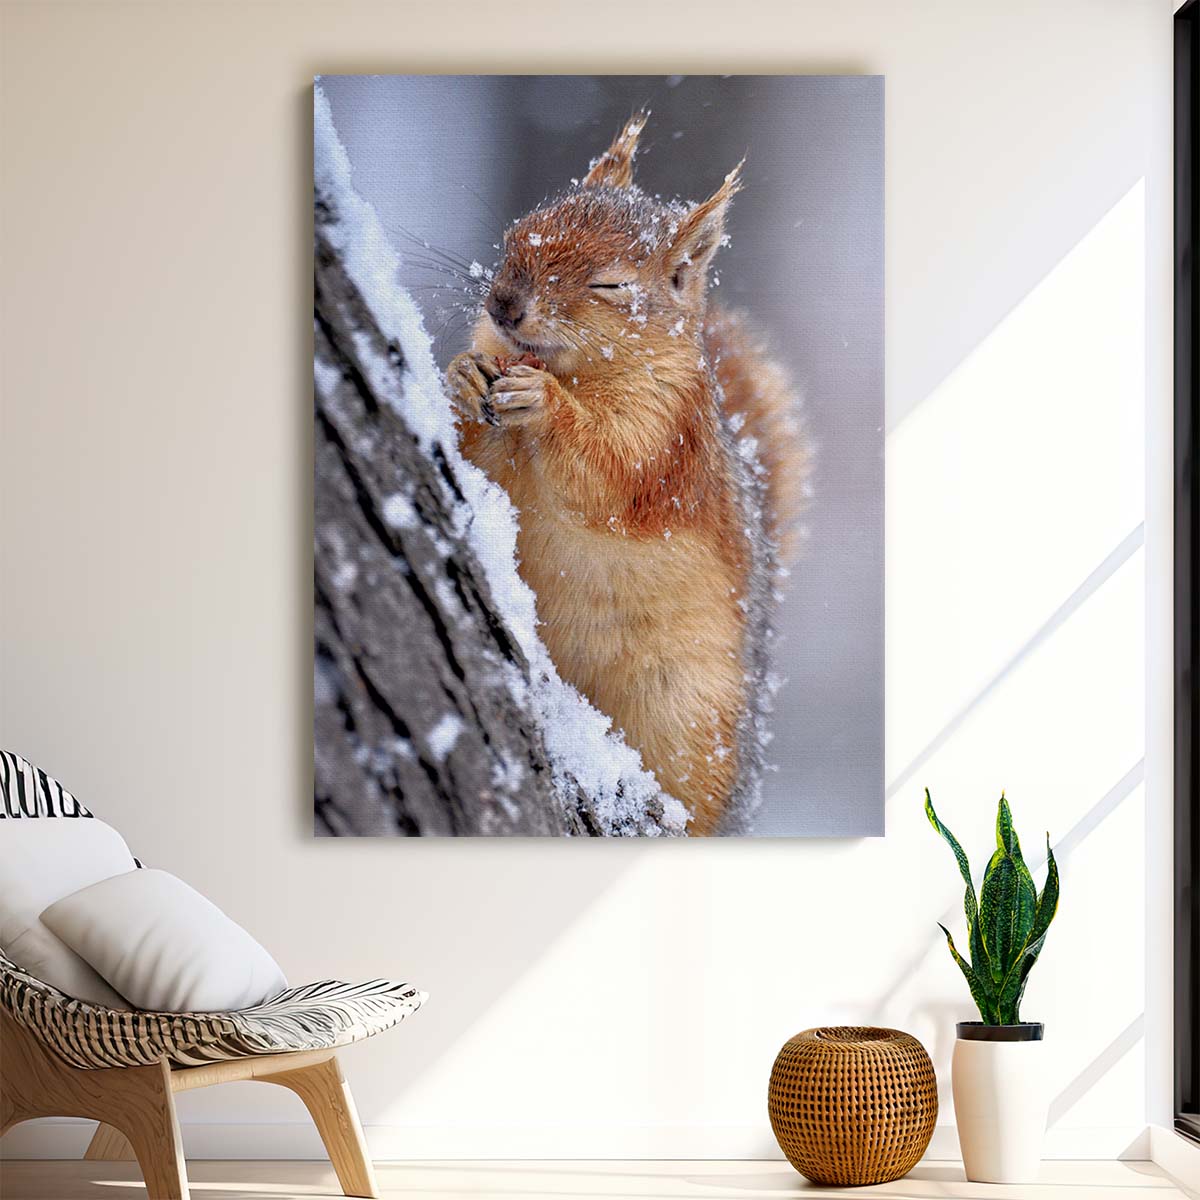 Winter Wildlife Photography Cute Squirrel Eating Acorn in Snowy Nature by Luxuriance Designs, made in USA